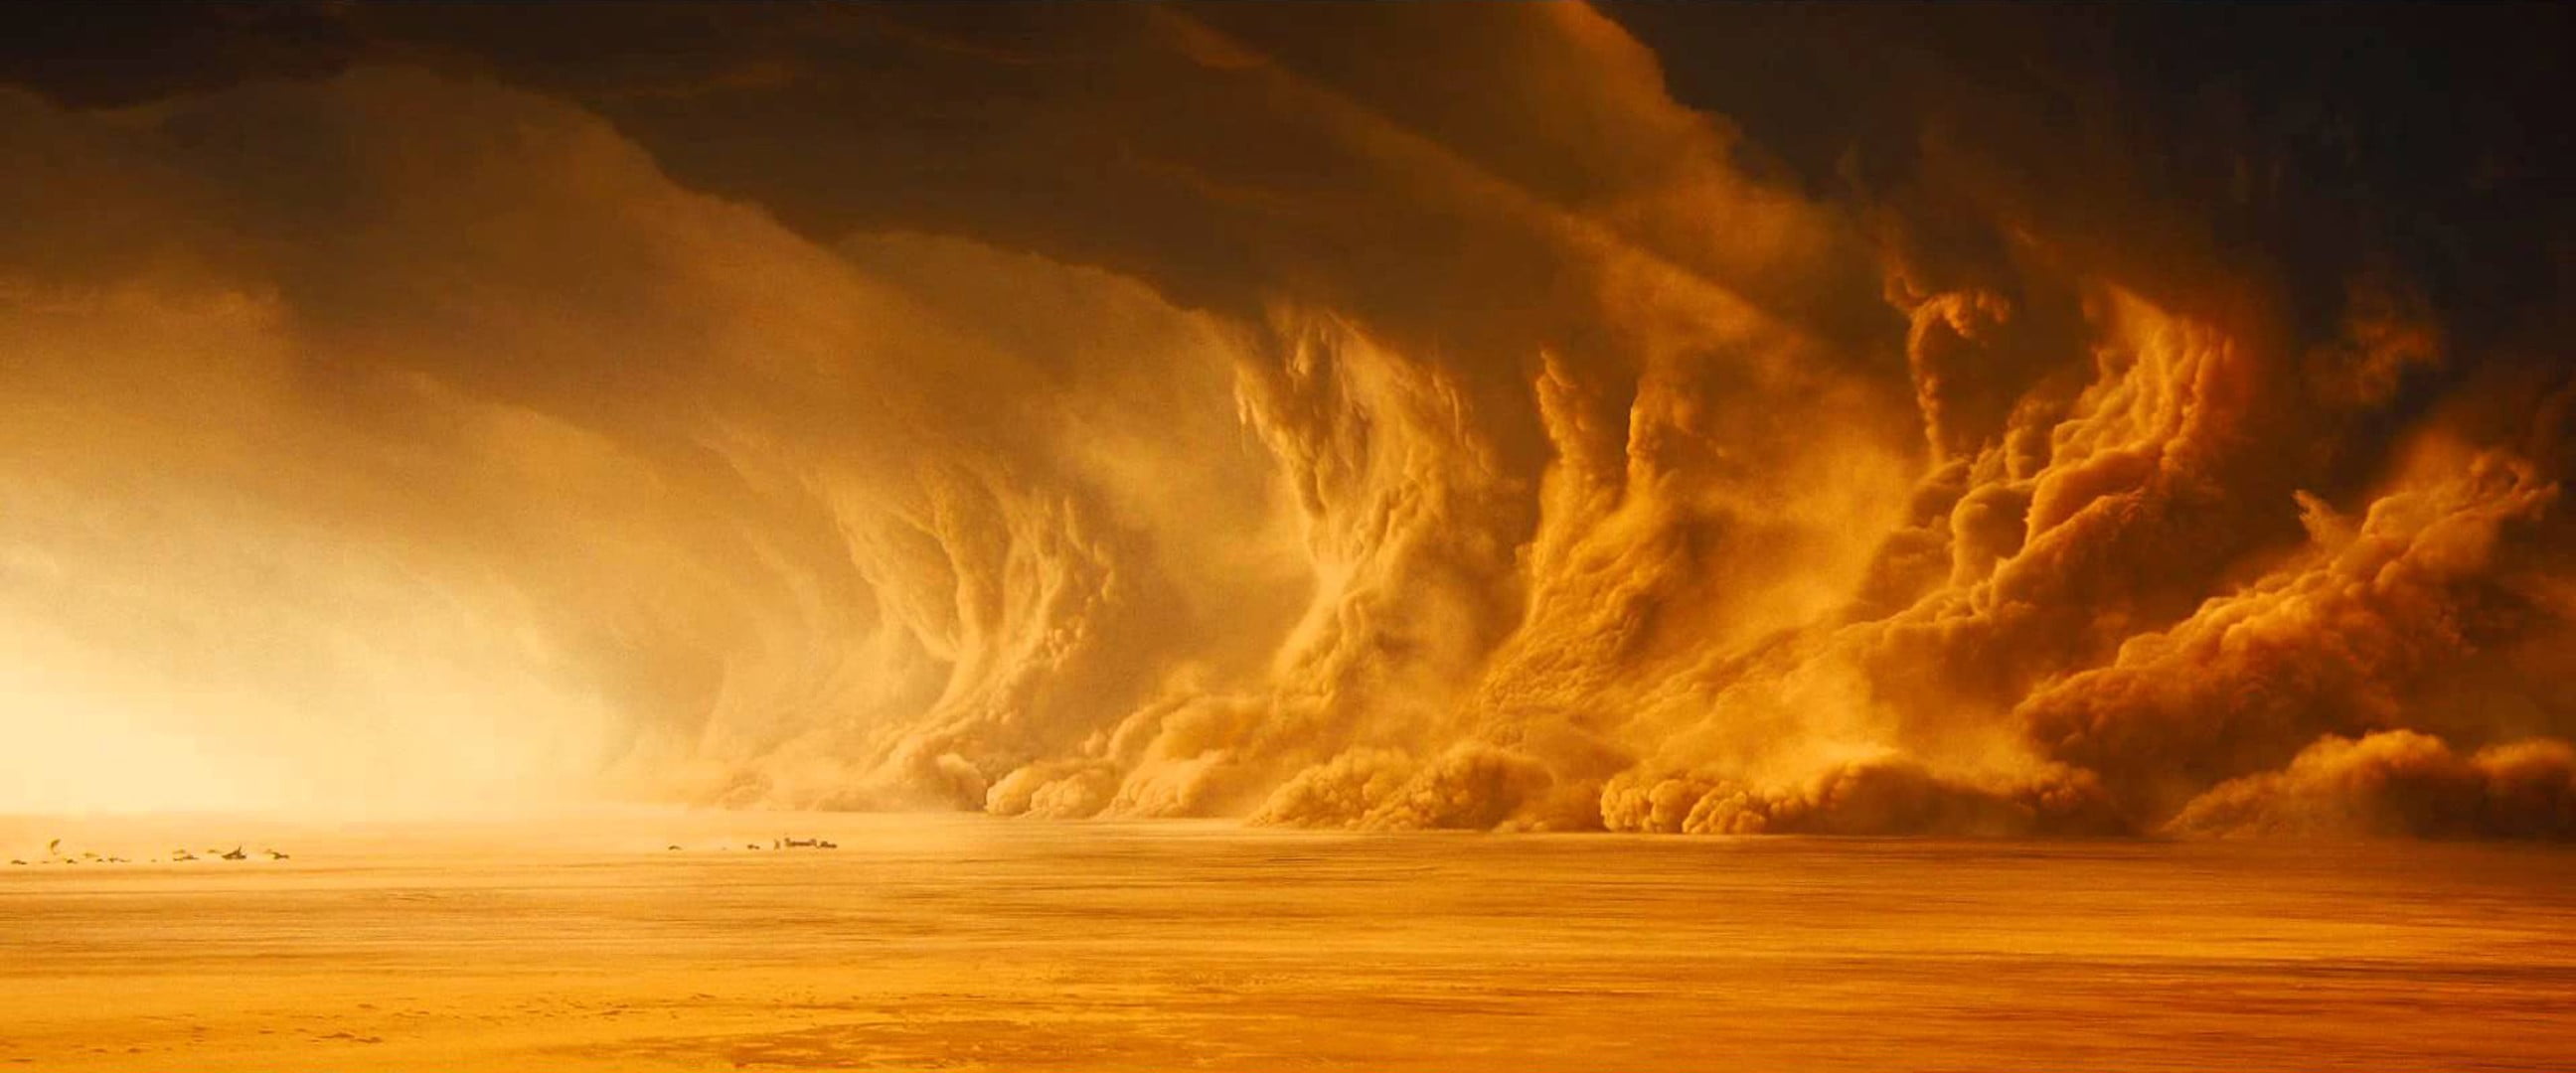 Brown And White Abstract Painting Sandstorms Mad Max Fury